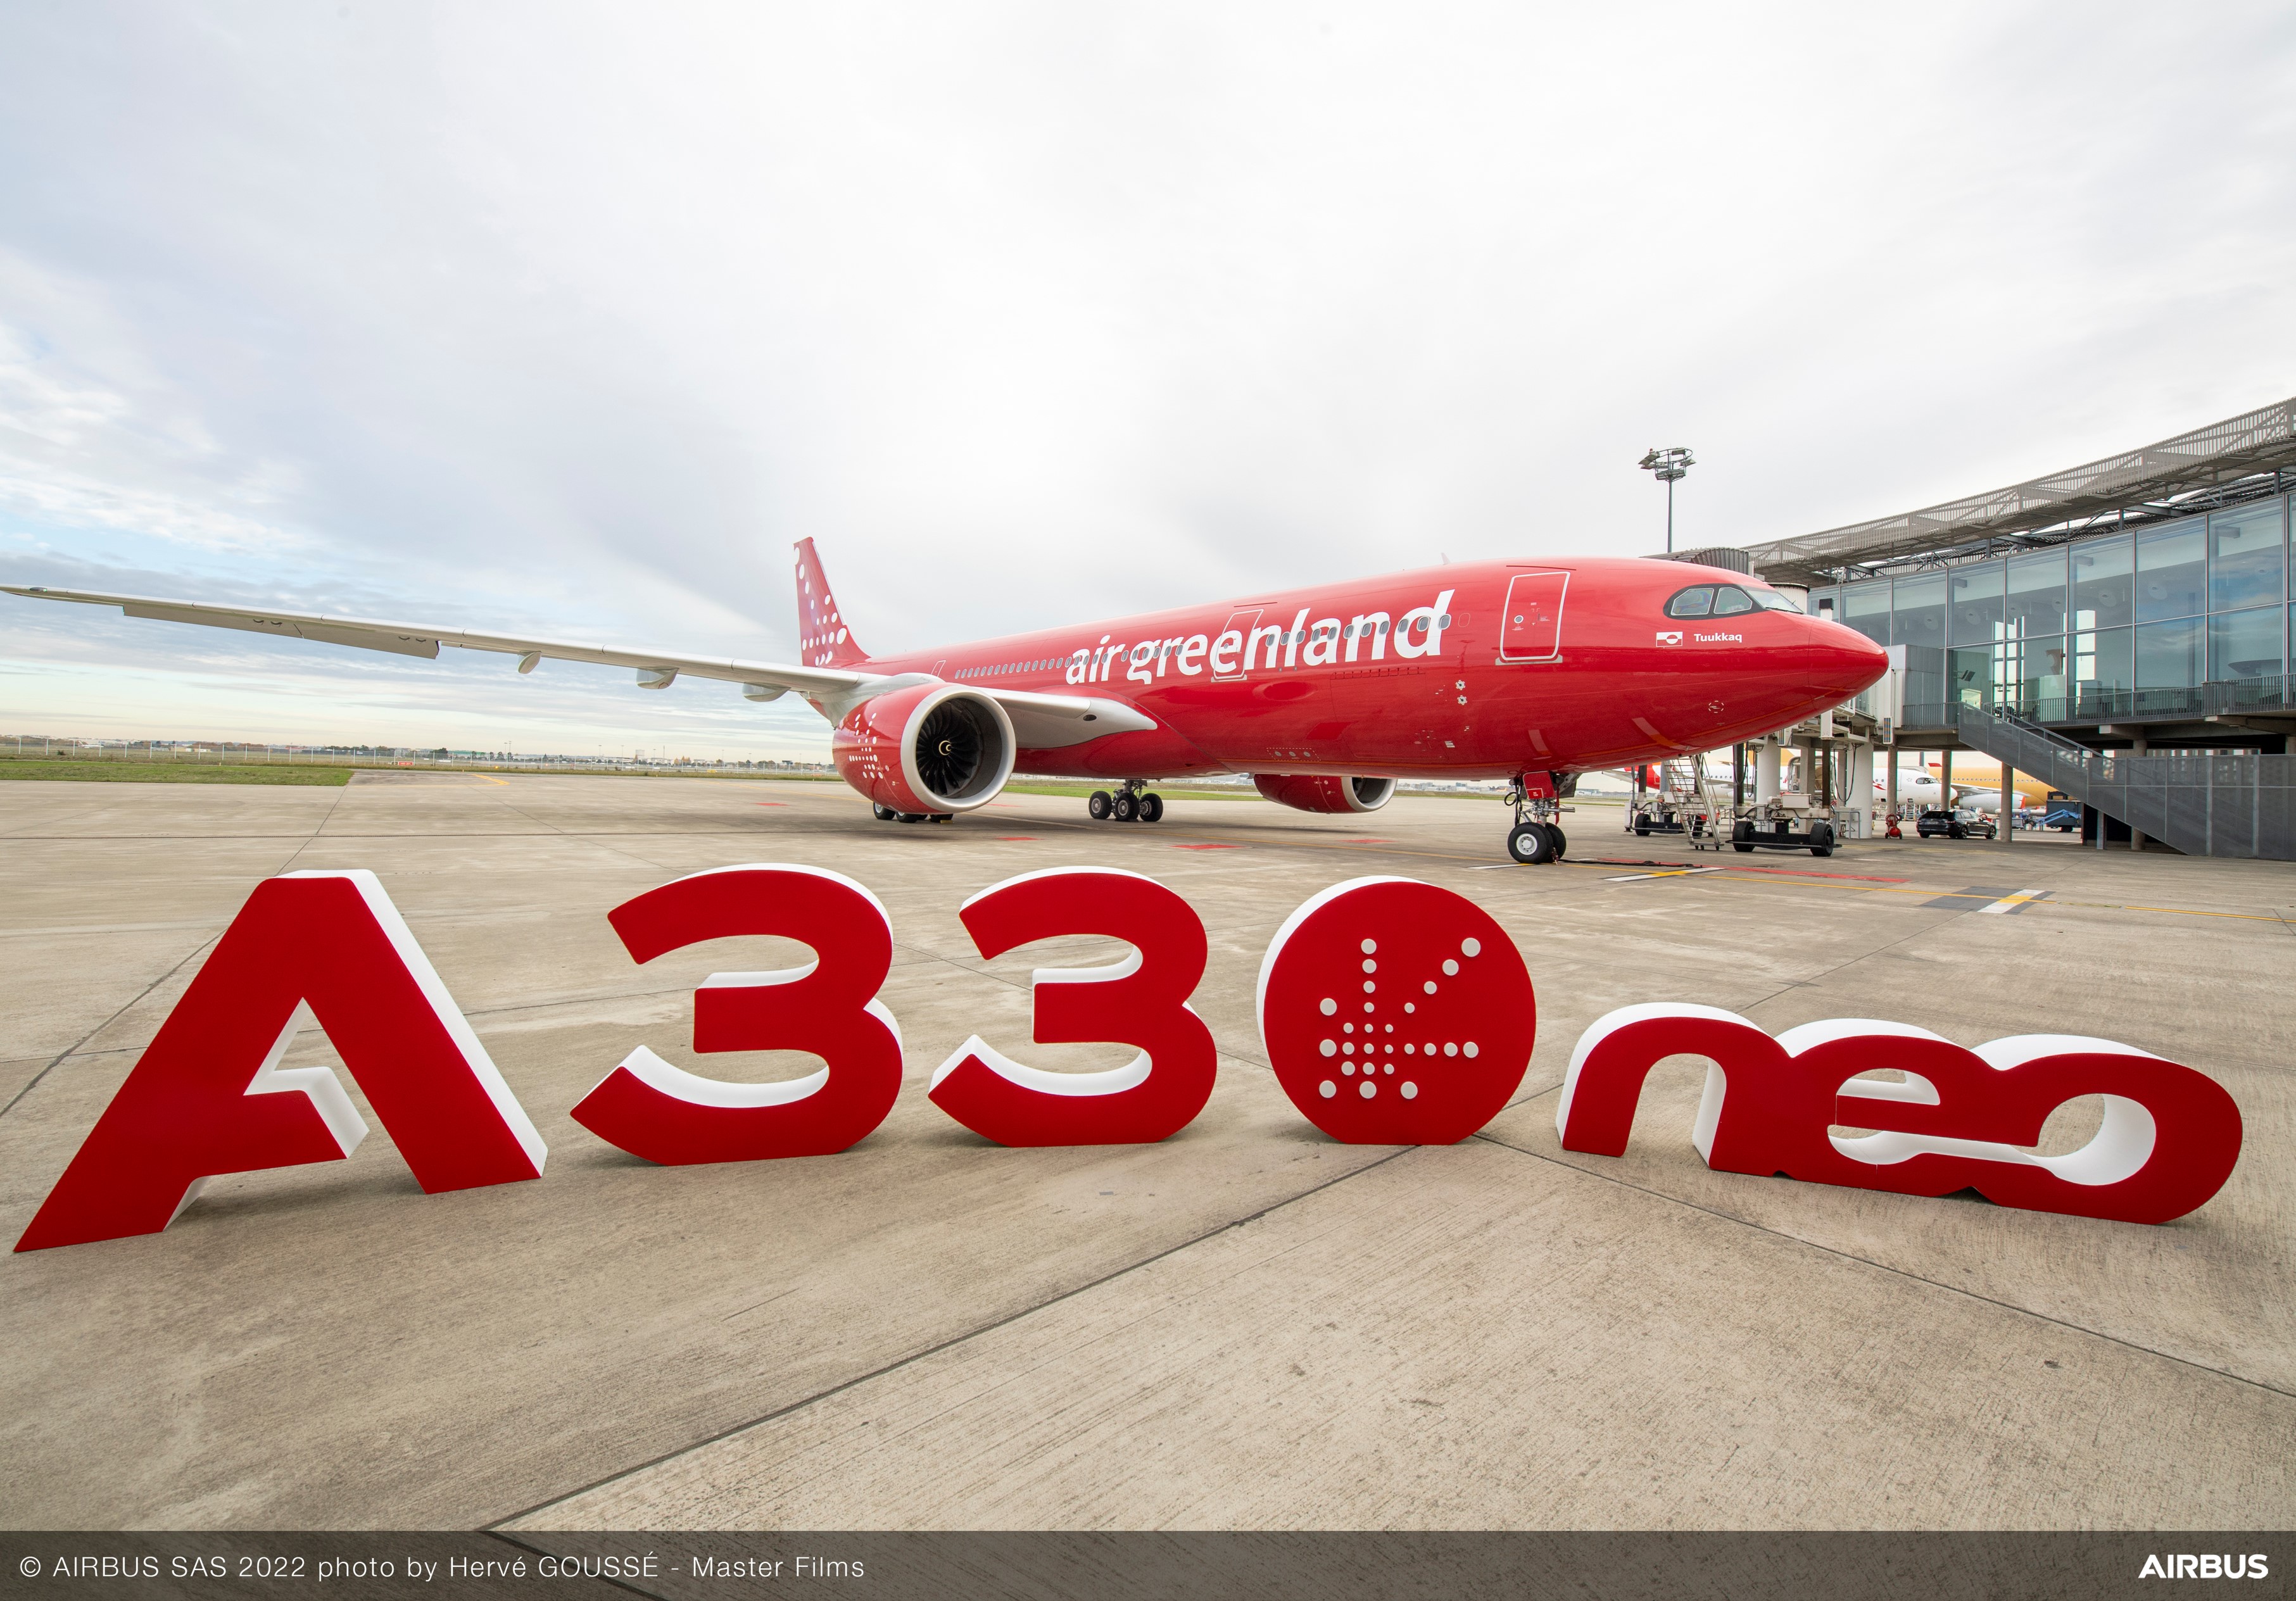 Air Greenland becomes latest operator of the A330neo